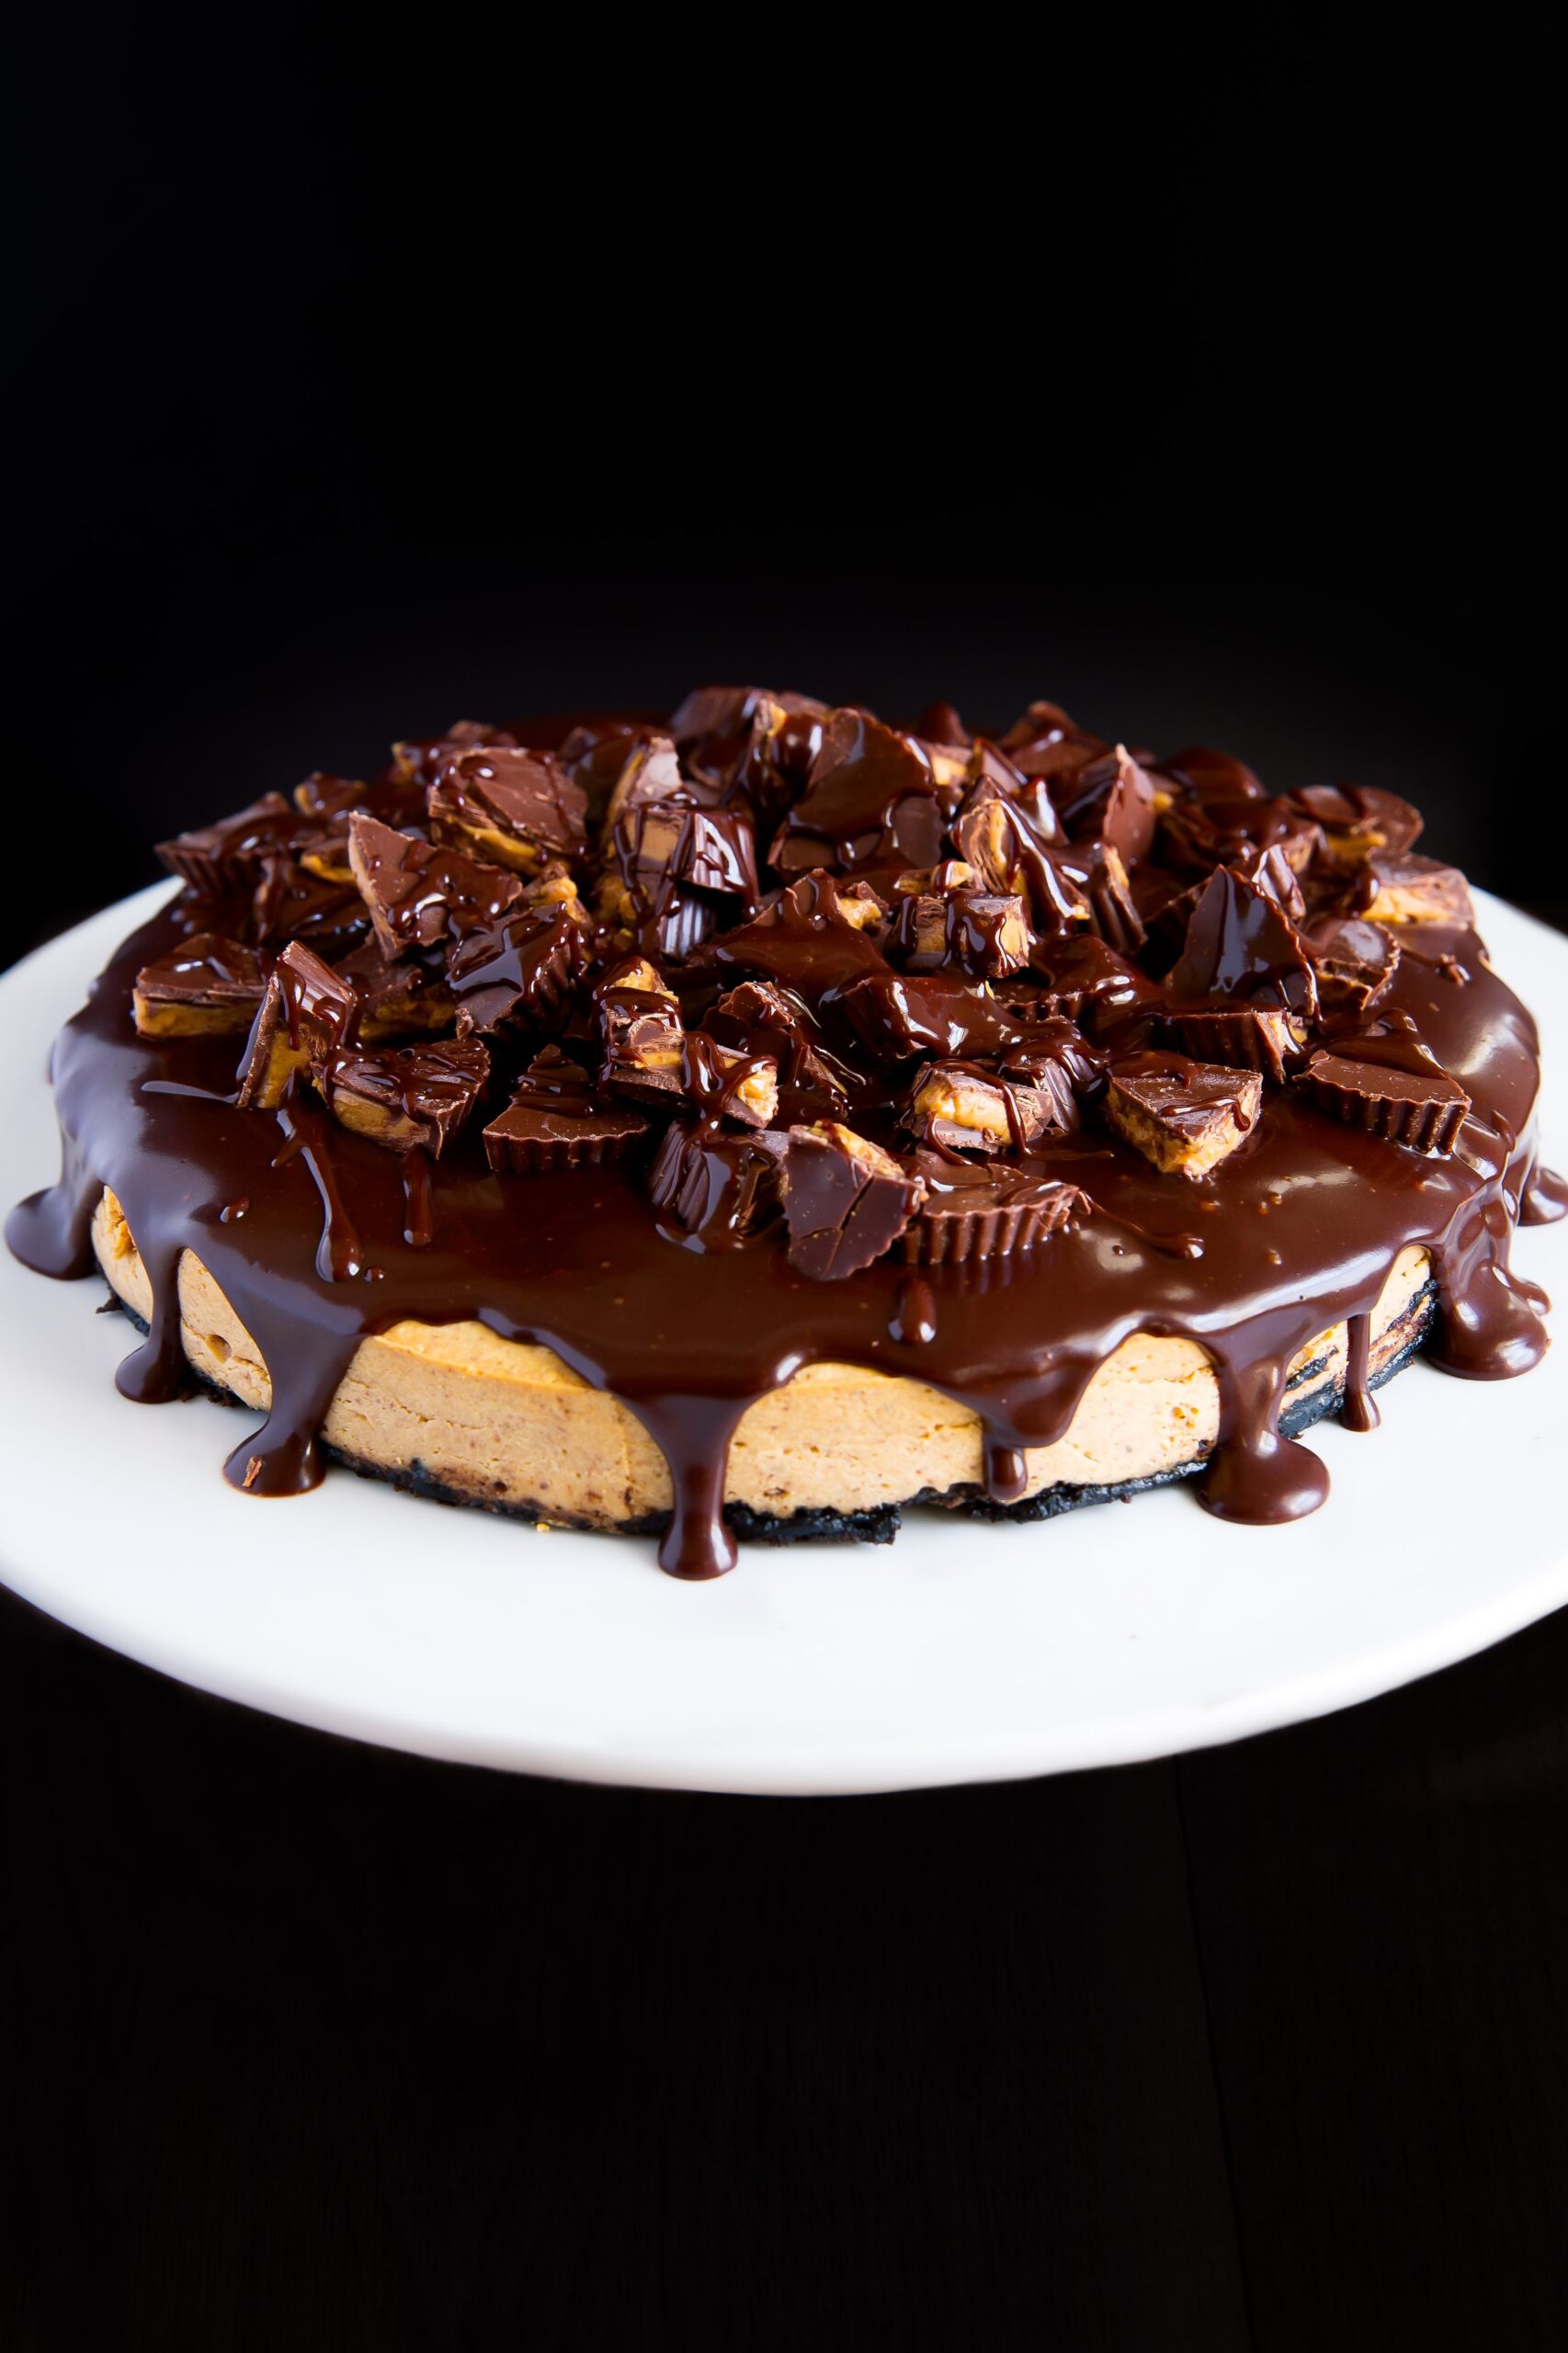 A Peanut Butter Cup Cheesecake with chocolate cookie crust, peanut butter cheesecake filling, and topped with a chocolate ganache and peanut butter cups!